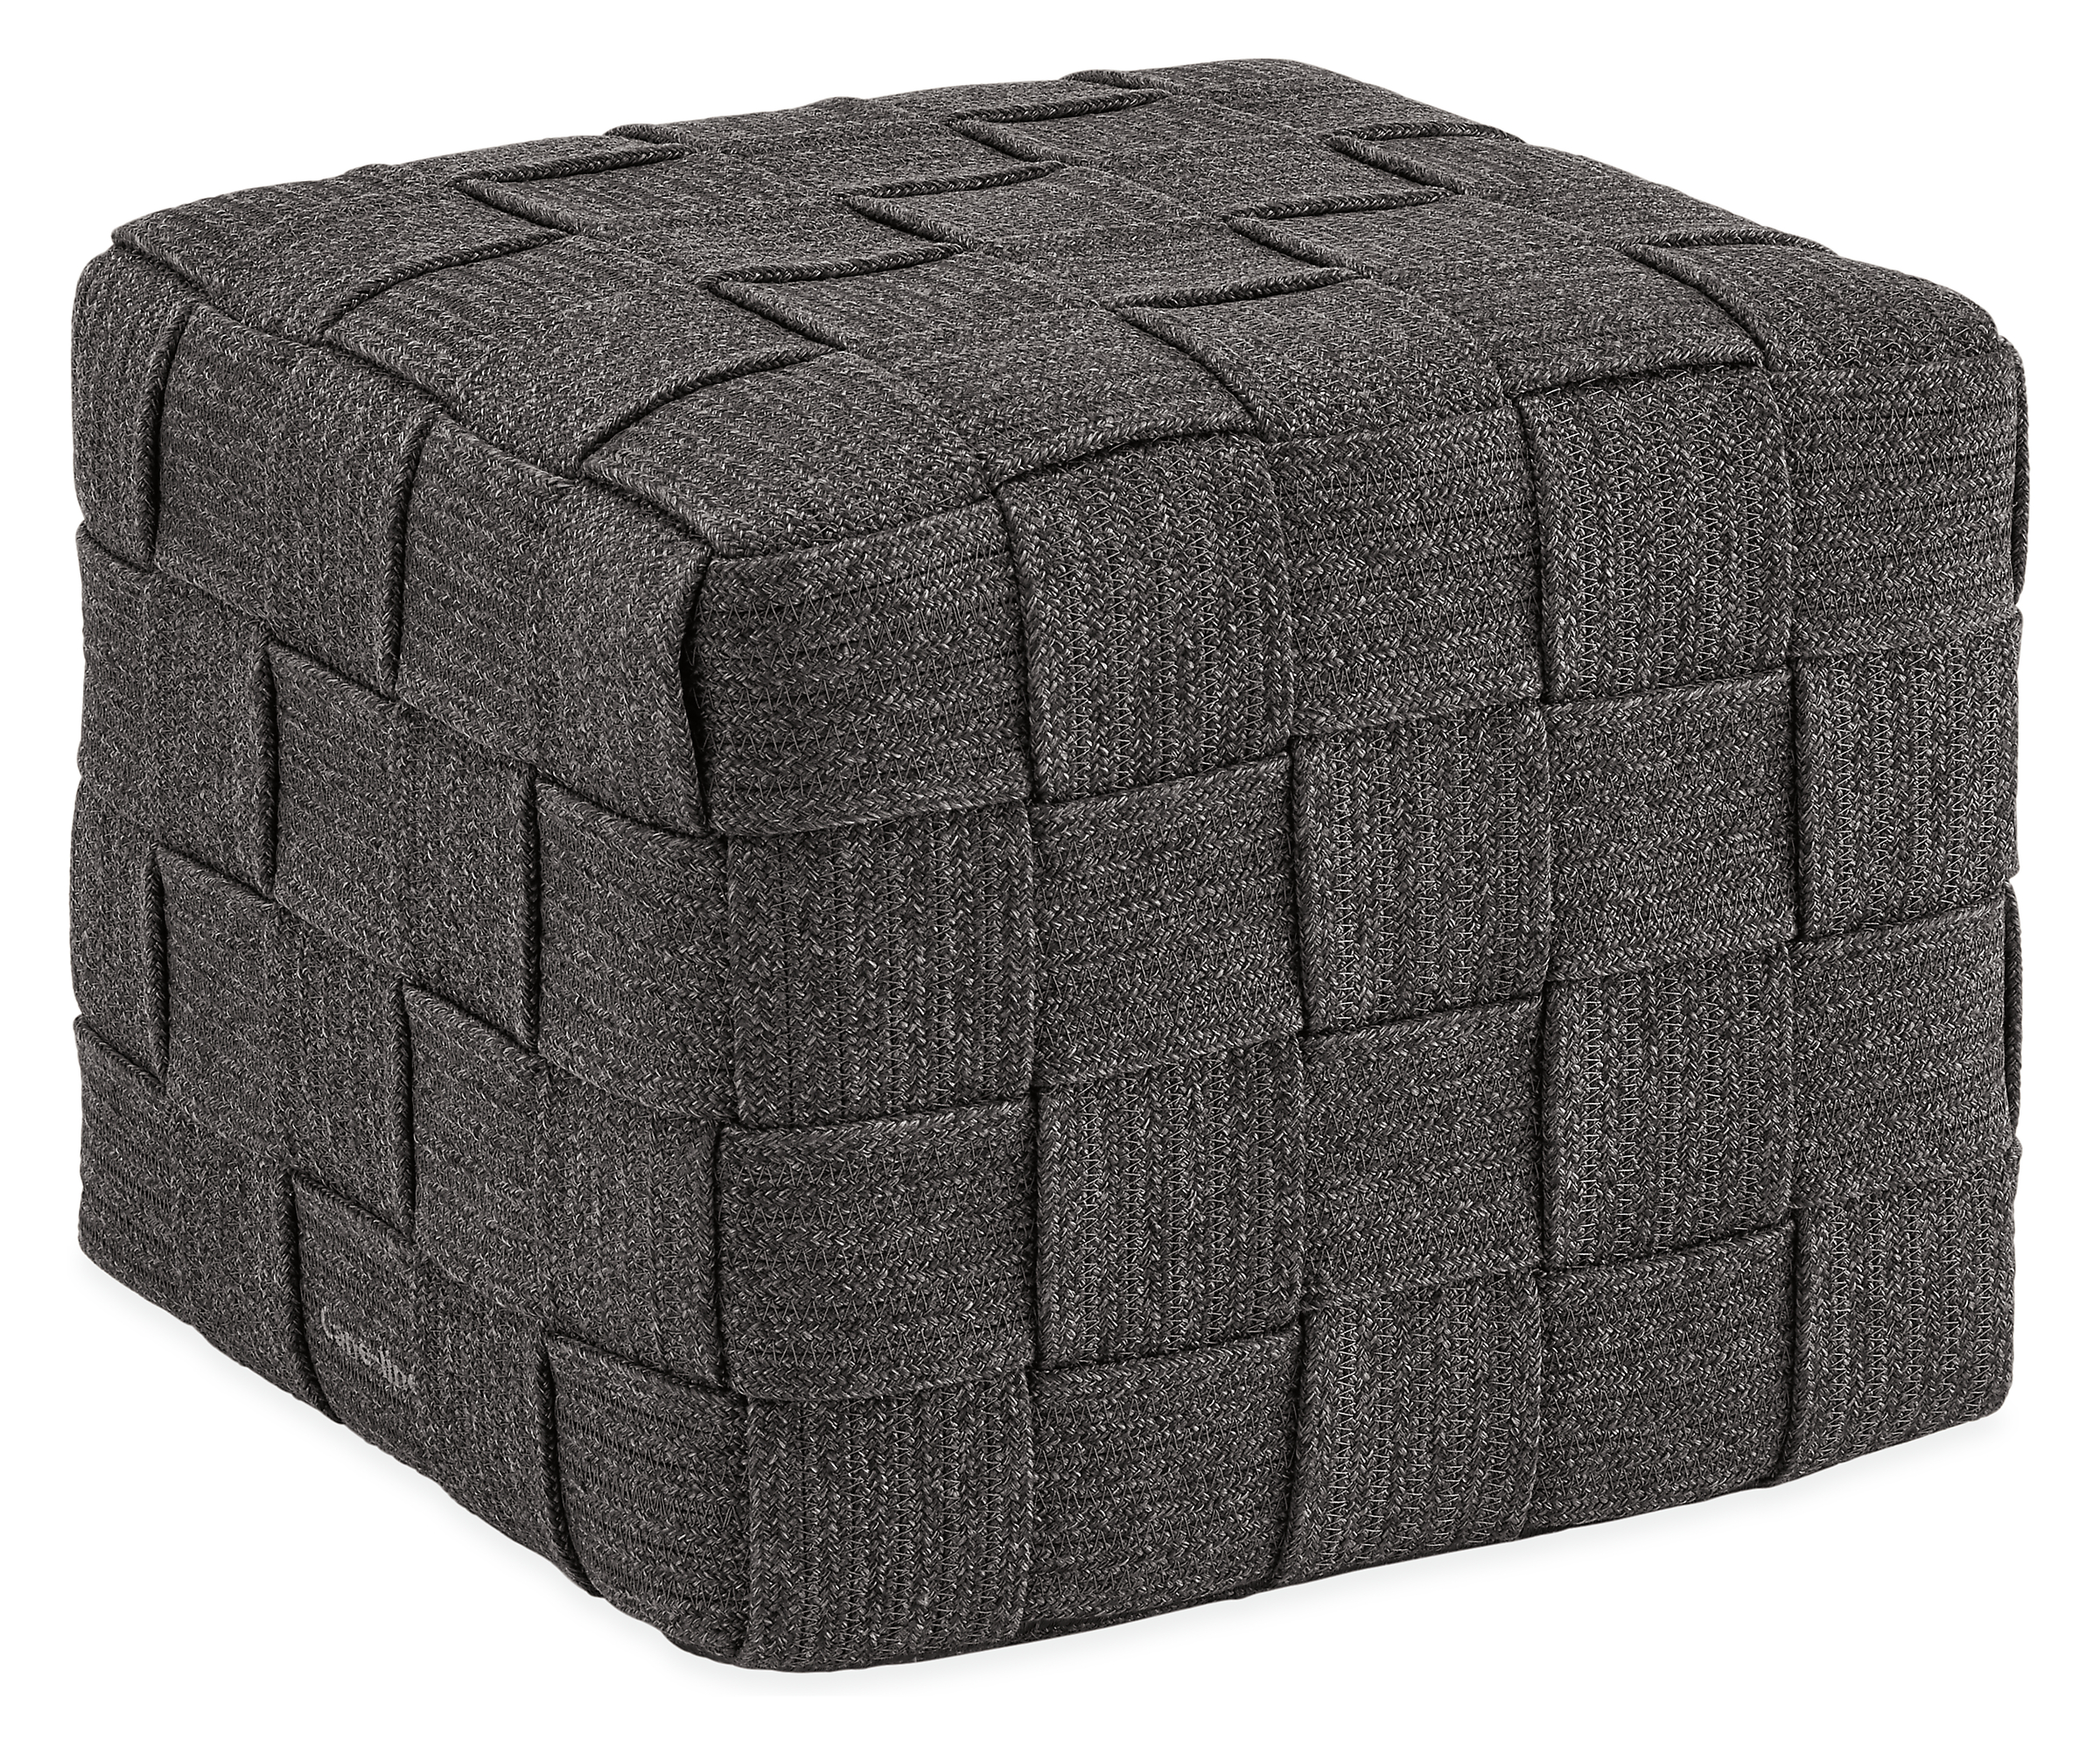 Flet 18w 18d 16h Square Ottoman in Slate